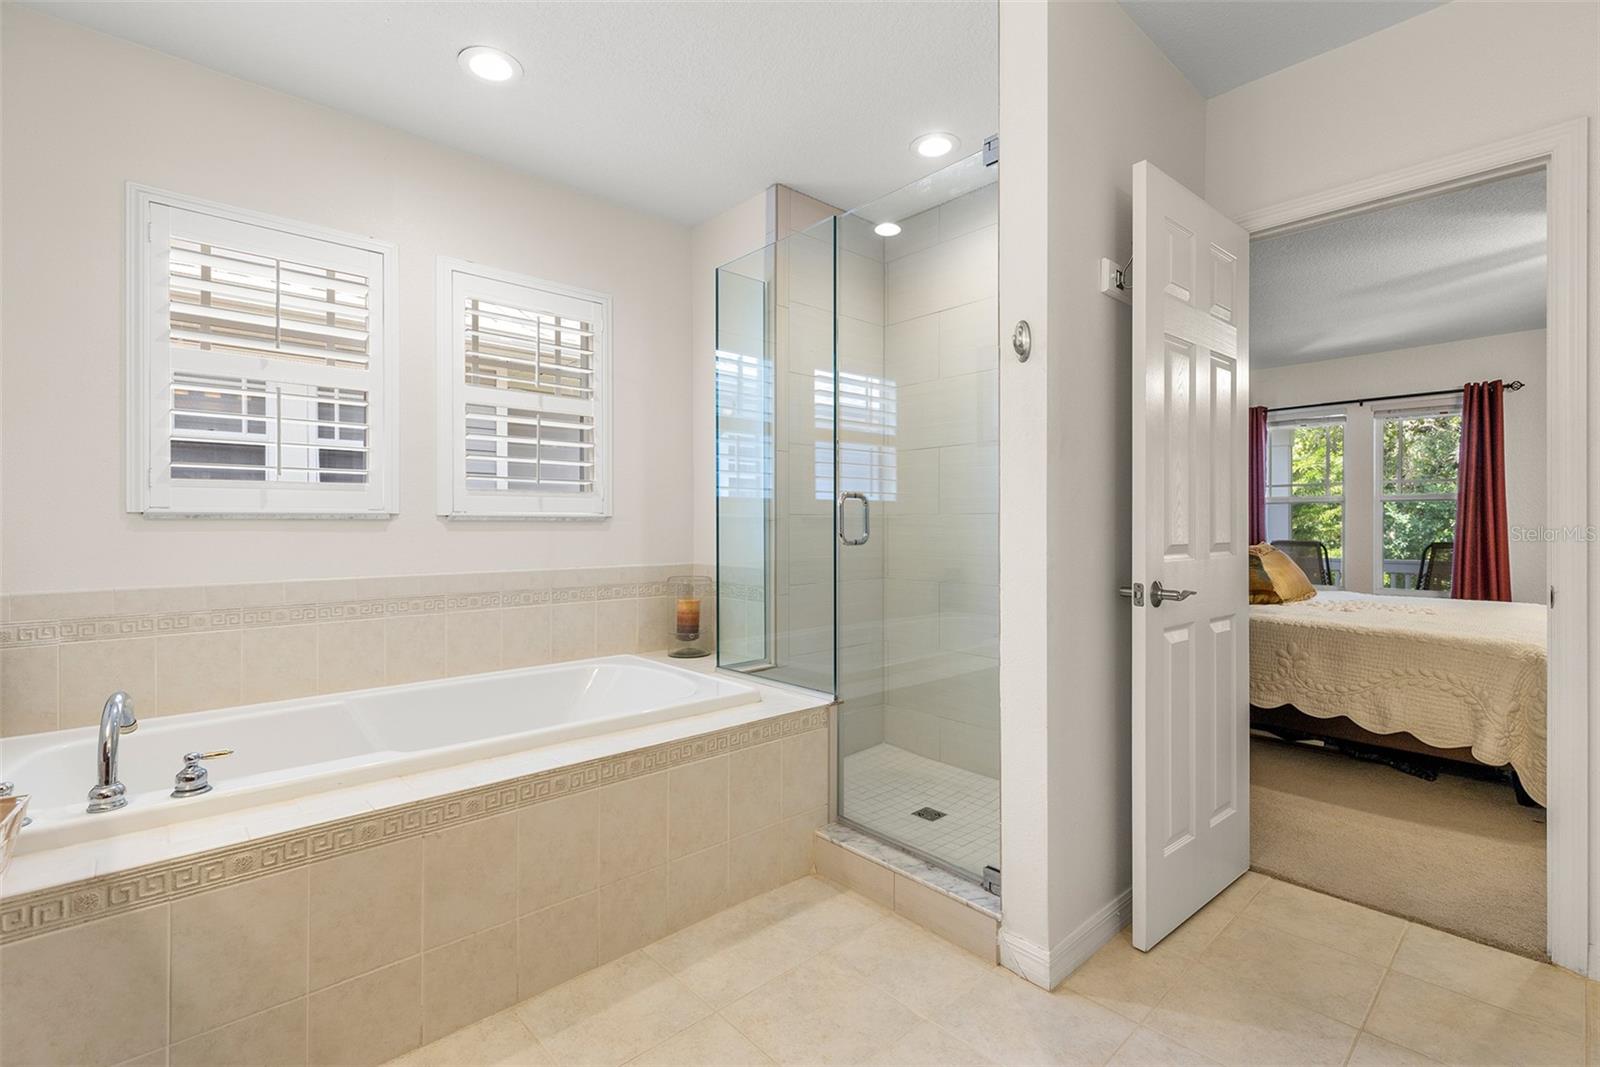 Separate tub and shower space with updated shower tile